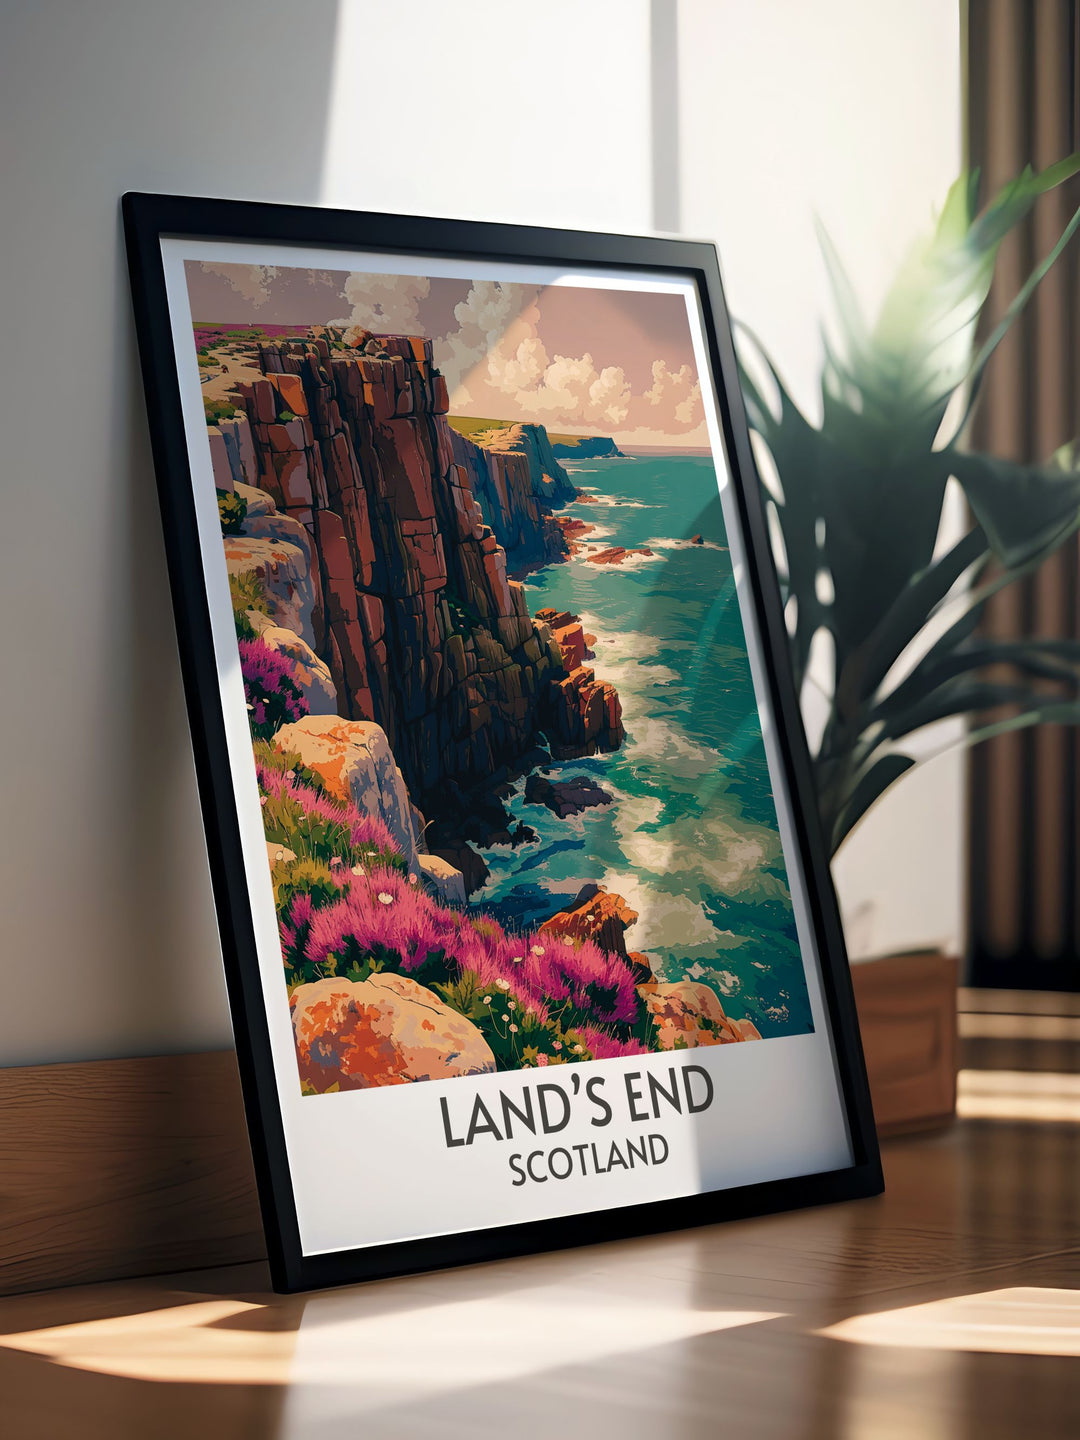 Custom England Prints offer personalized art of Englands beloved locations. Capture memories of the bustling streets of London, the serene Cotswolds countryside, or the majestic Lake District peaks, tailored to your style and space.